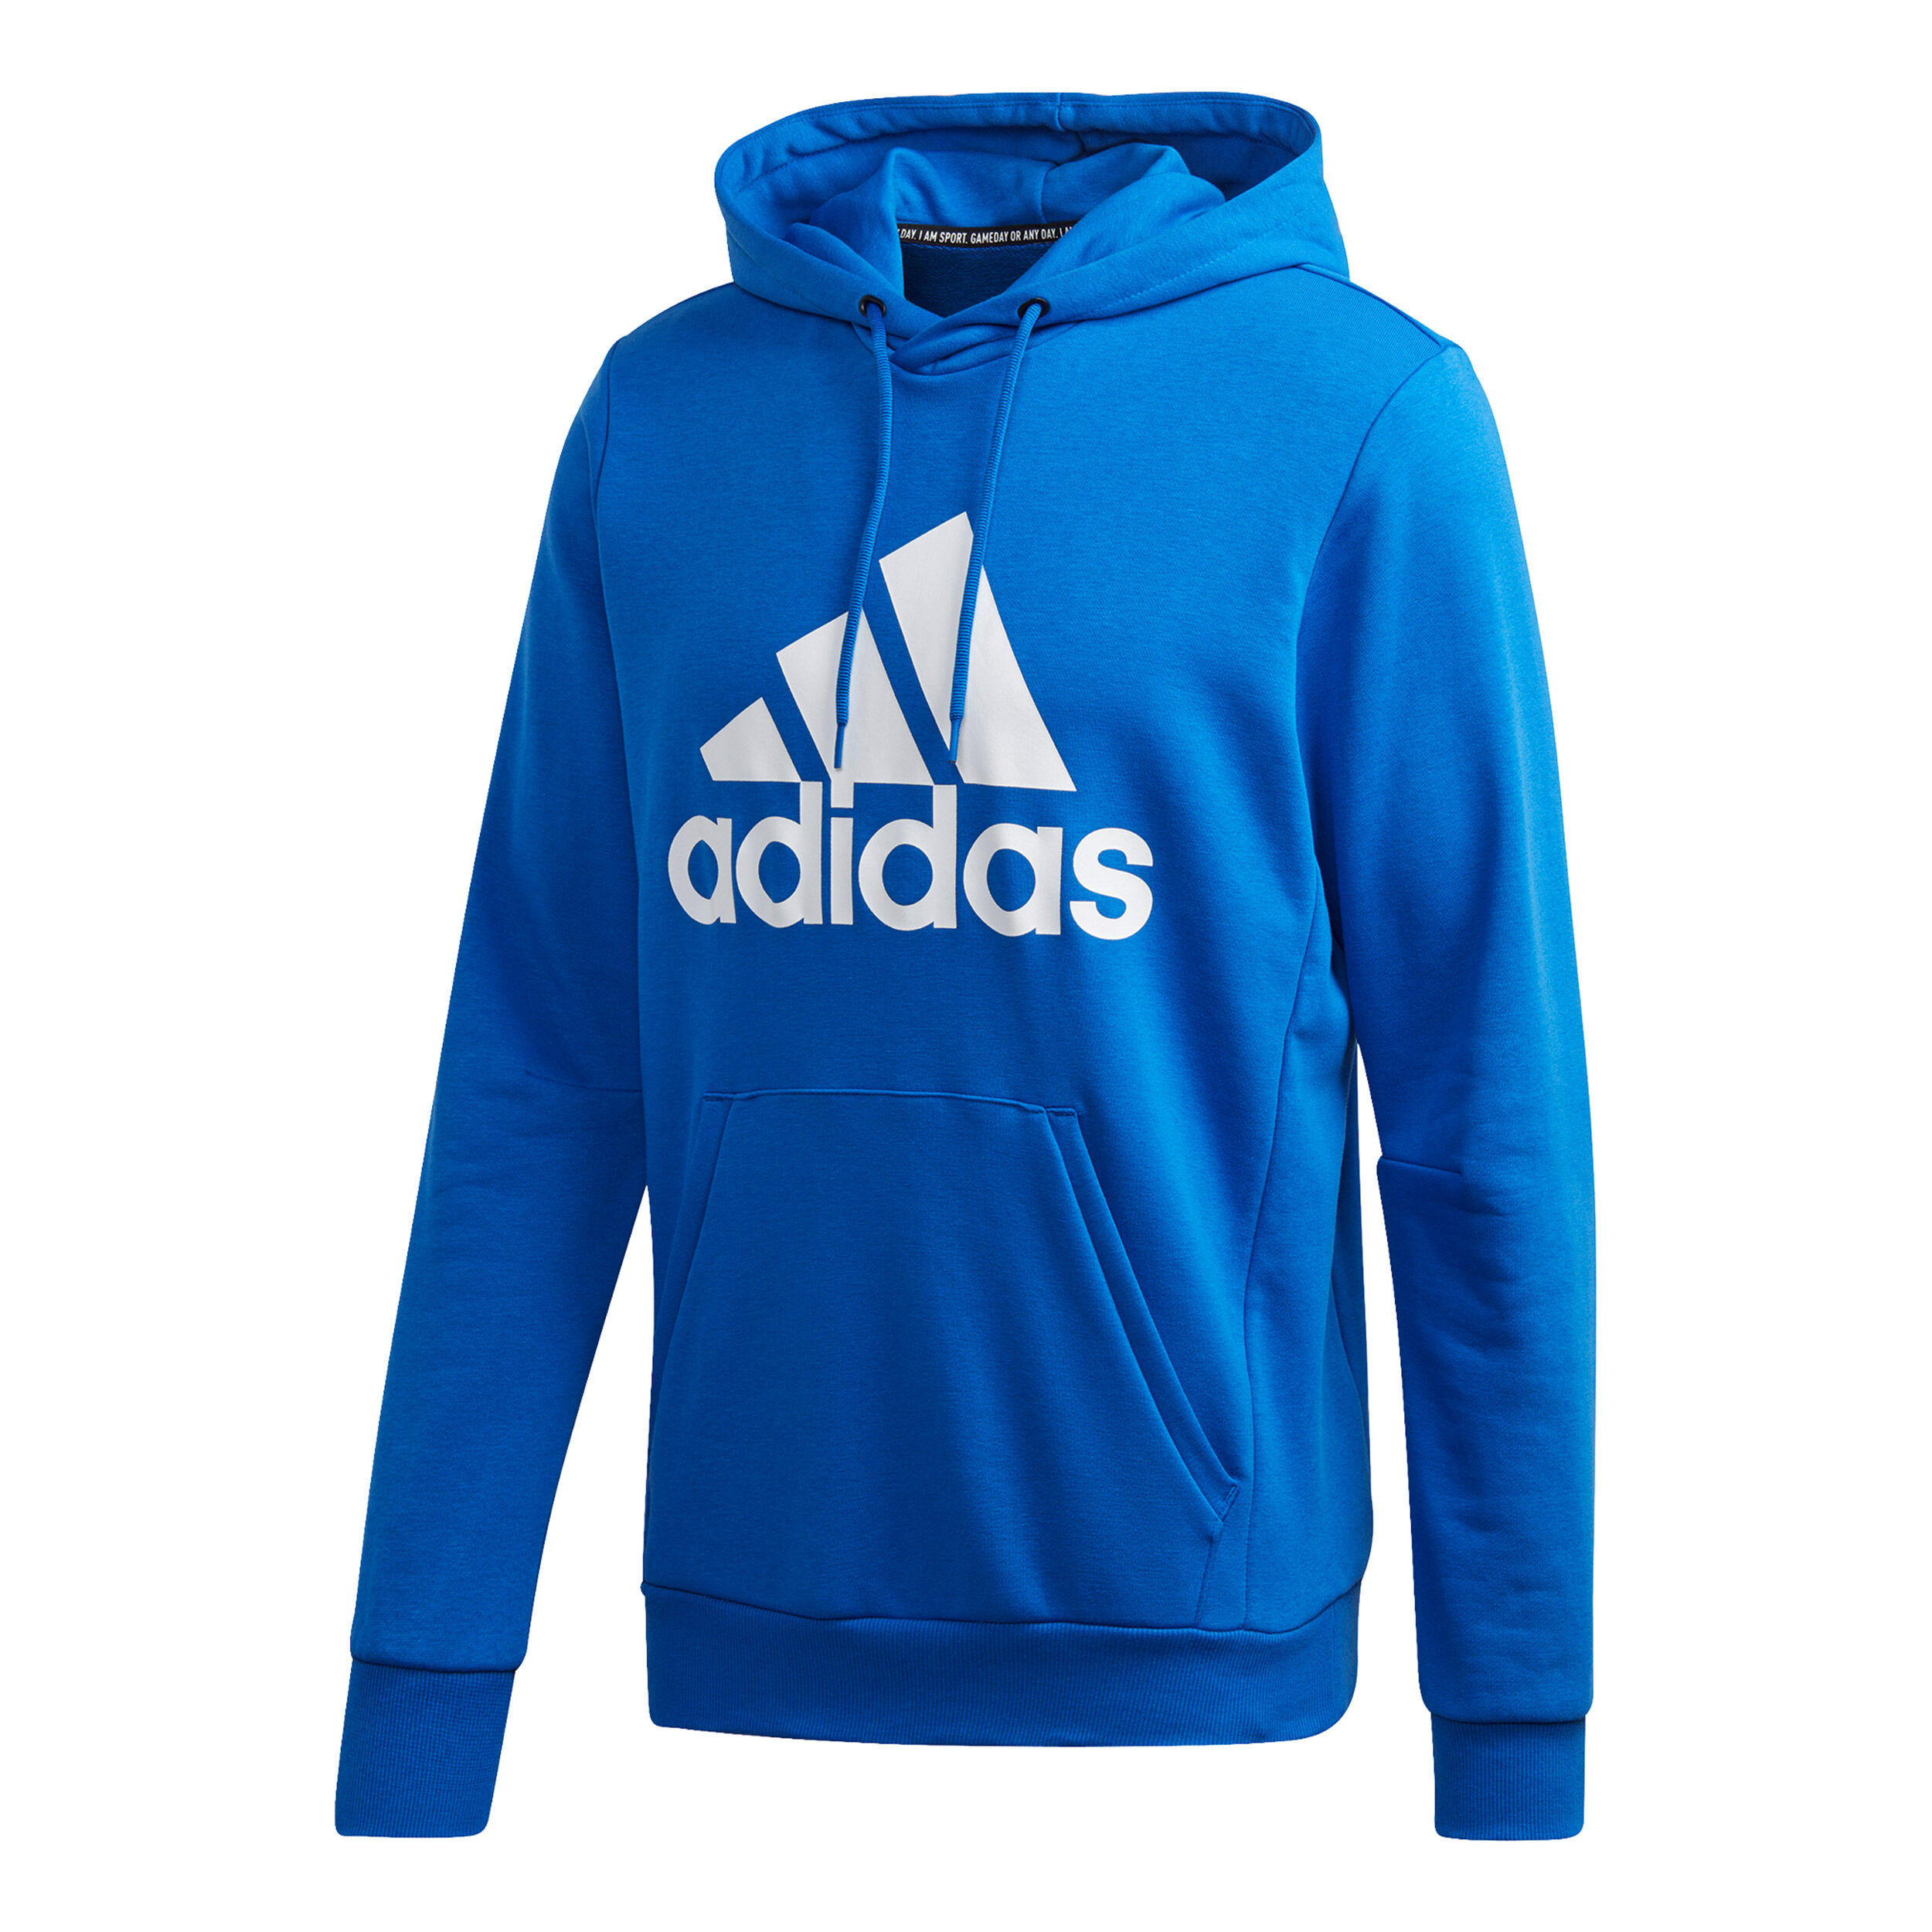 adidas i am sport game day or anyday jacket